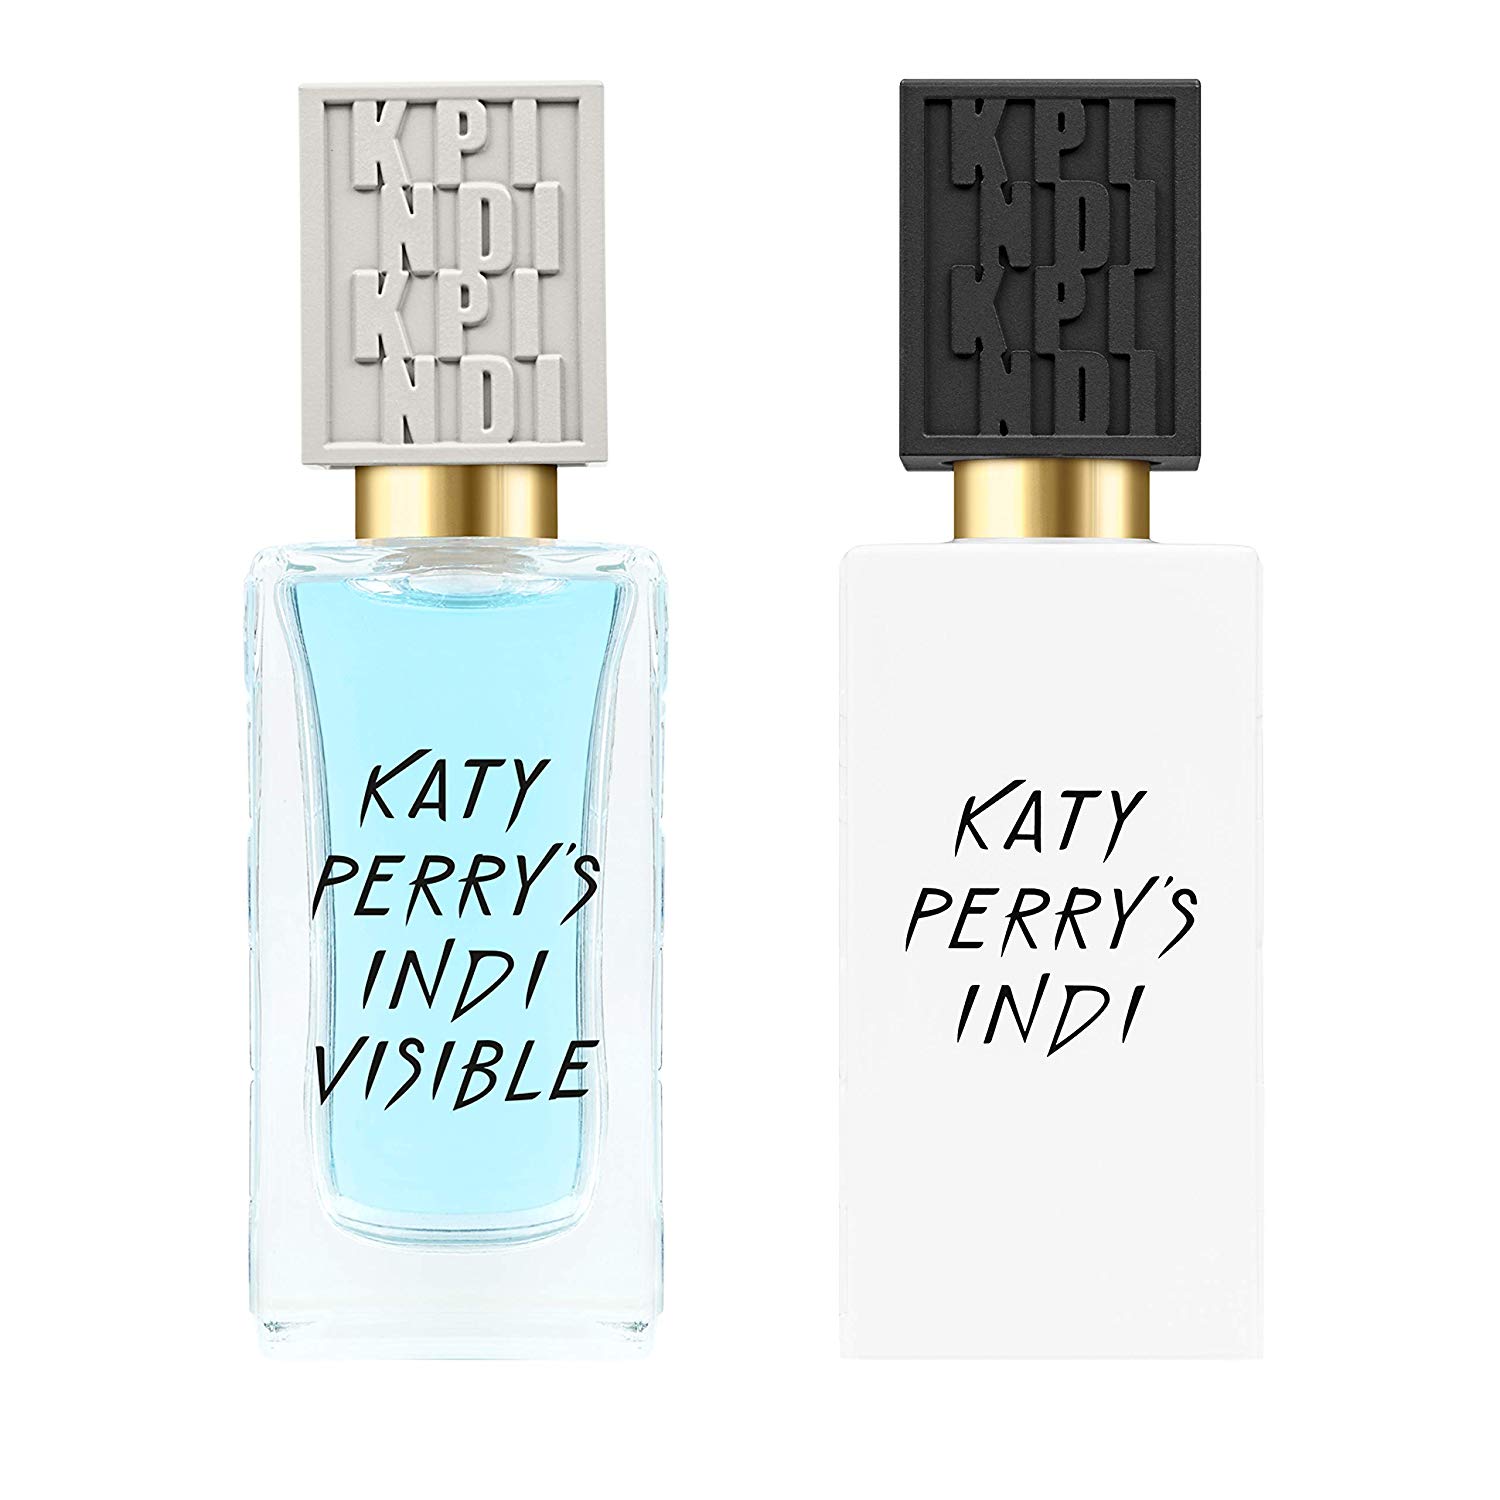 Katy Perry Assorted Perfume Gift Set for Women, 2 Pieces - image 2 of 2